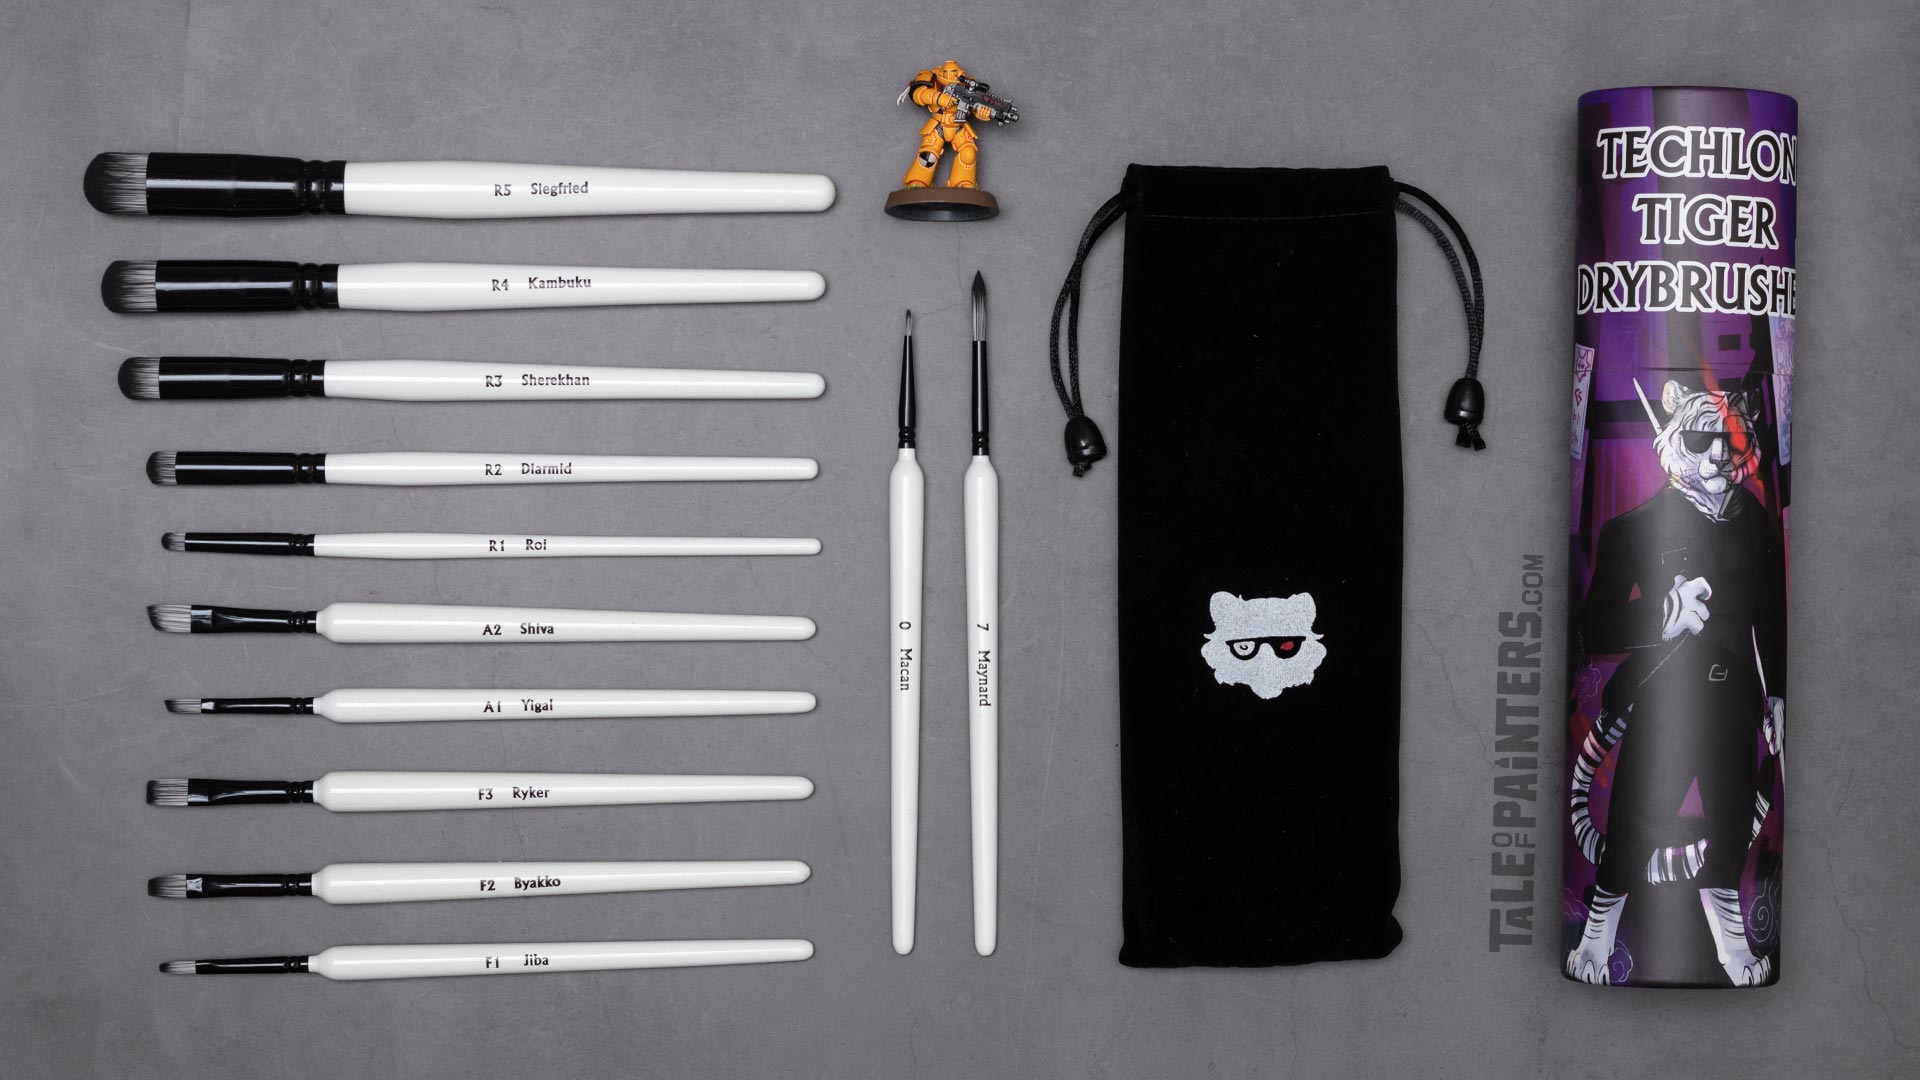 Contents of Chronicle Cards' Techlon Tiger Drybrush Set